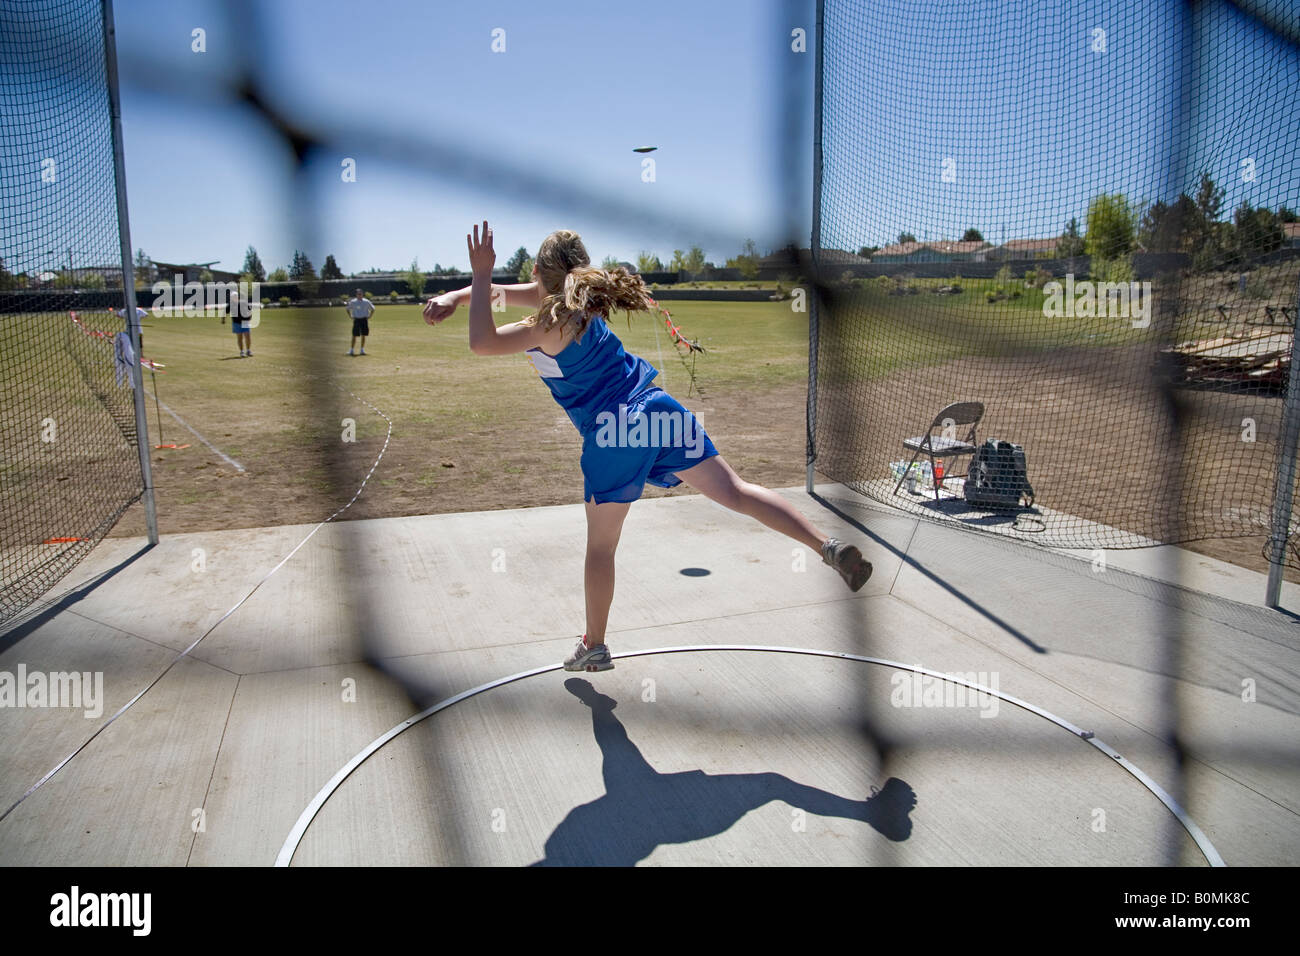 A middle school junior high school district track meet in the spring track season This is a girl s discus throw Stock Photo